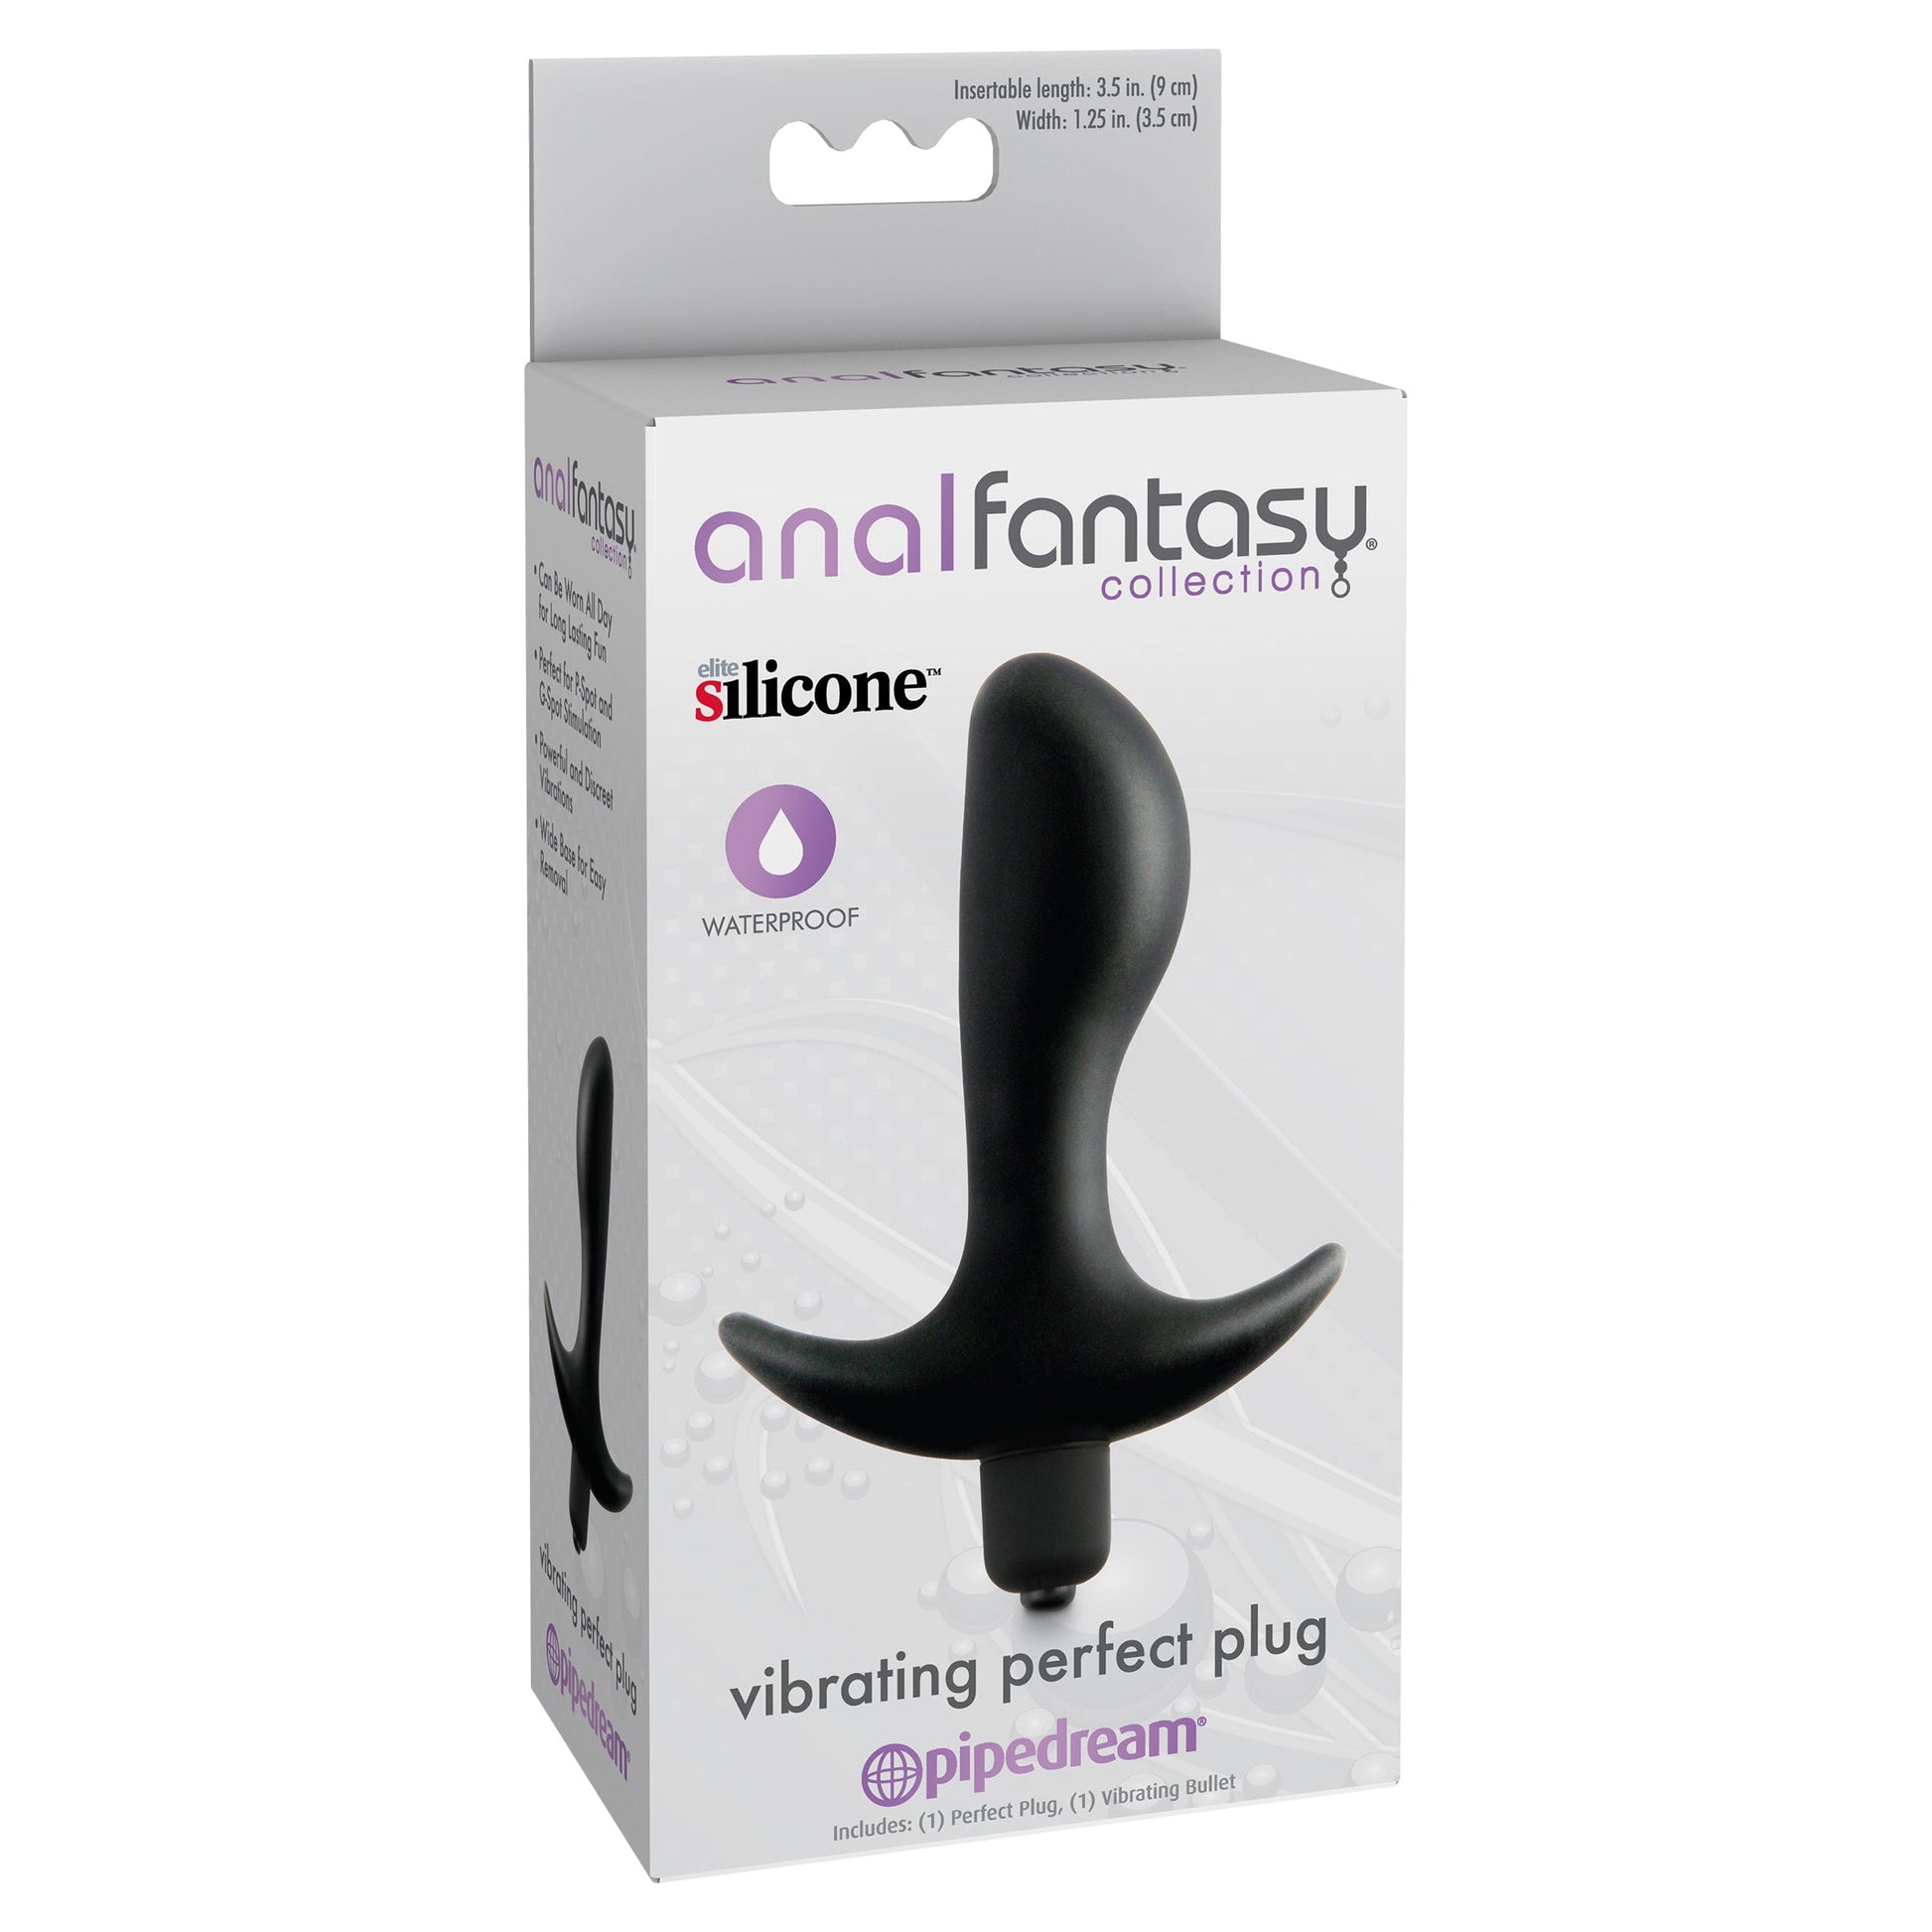 Anal Fantasy Collection Vibrating Perfect Plug - Black - Thorn & Feather Sex Toy Canada